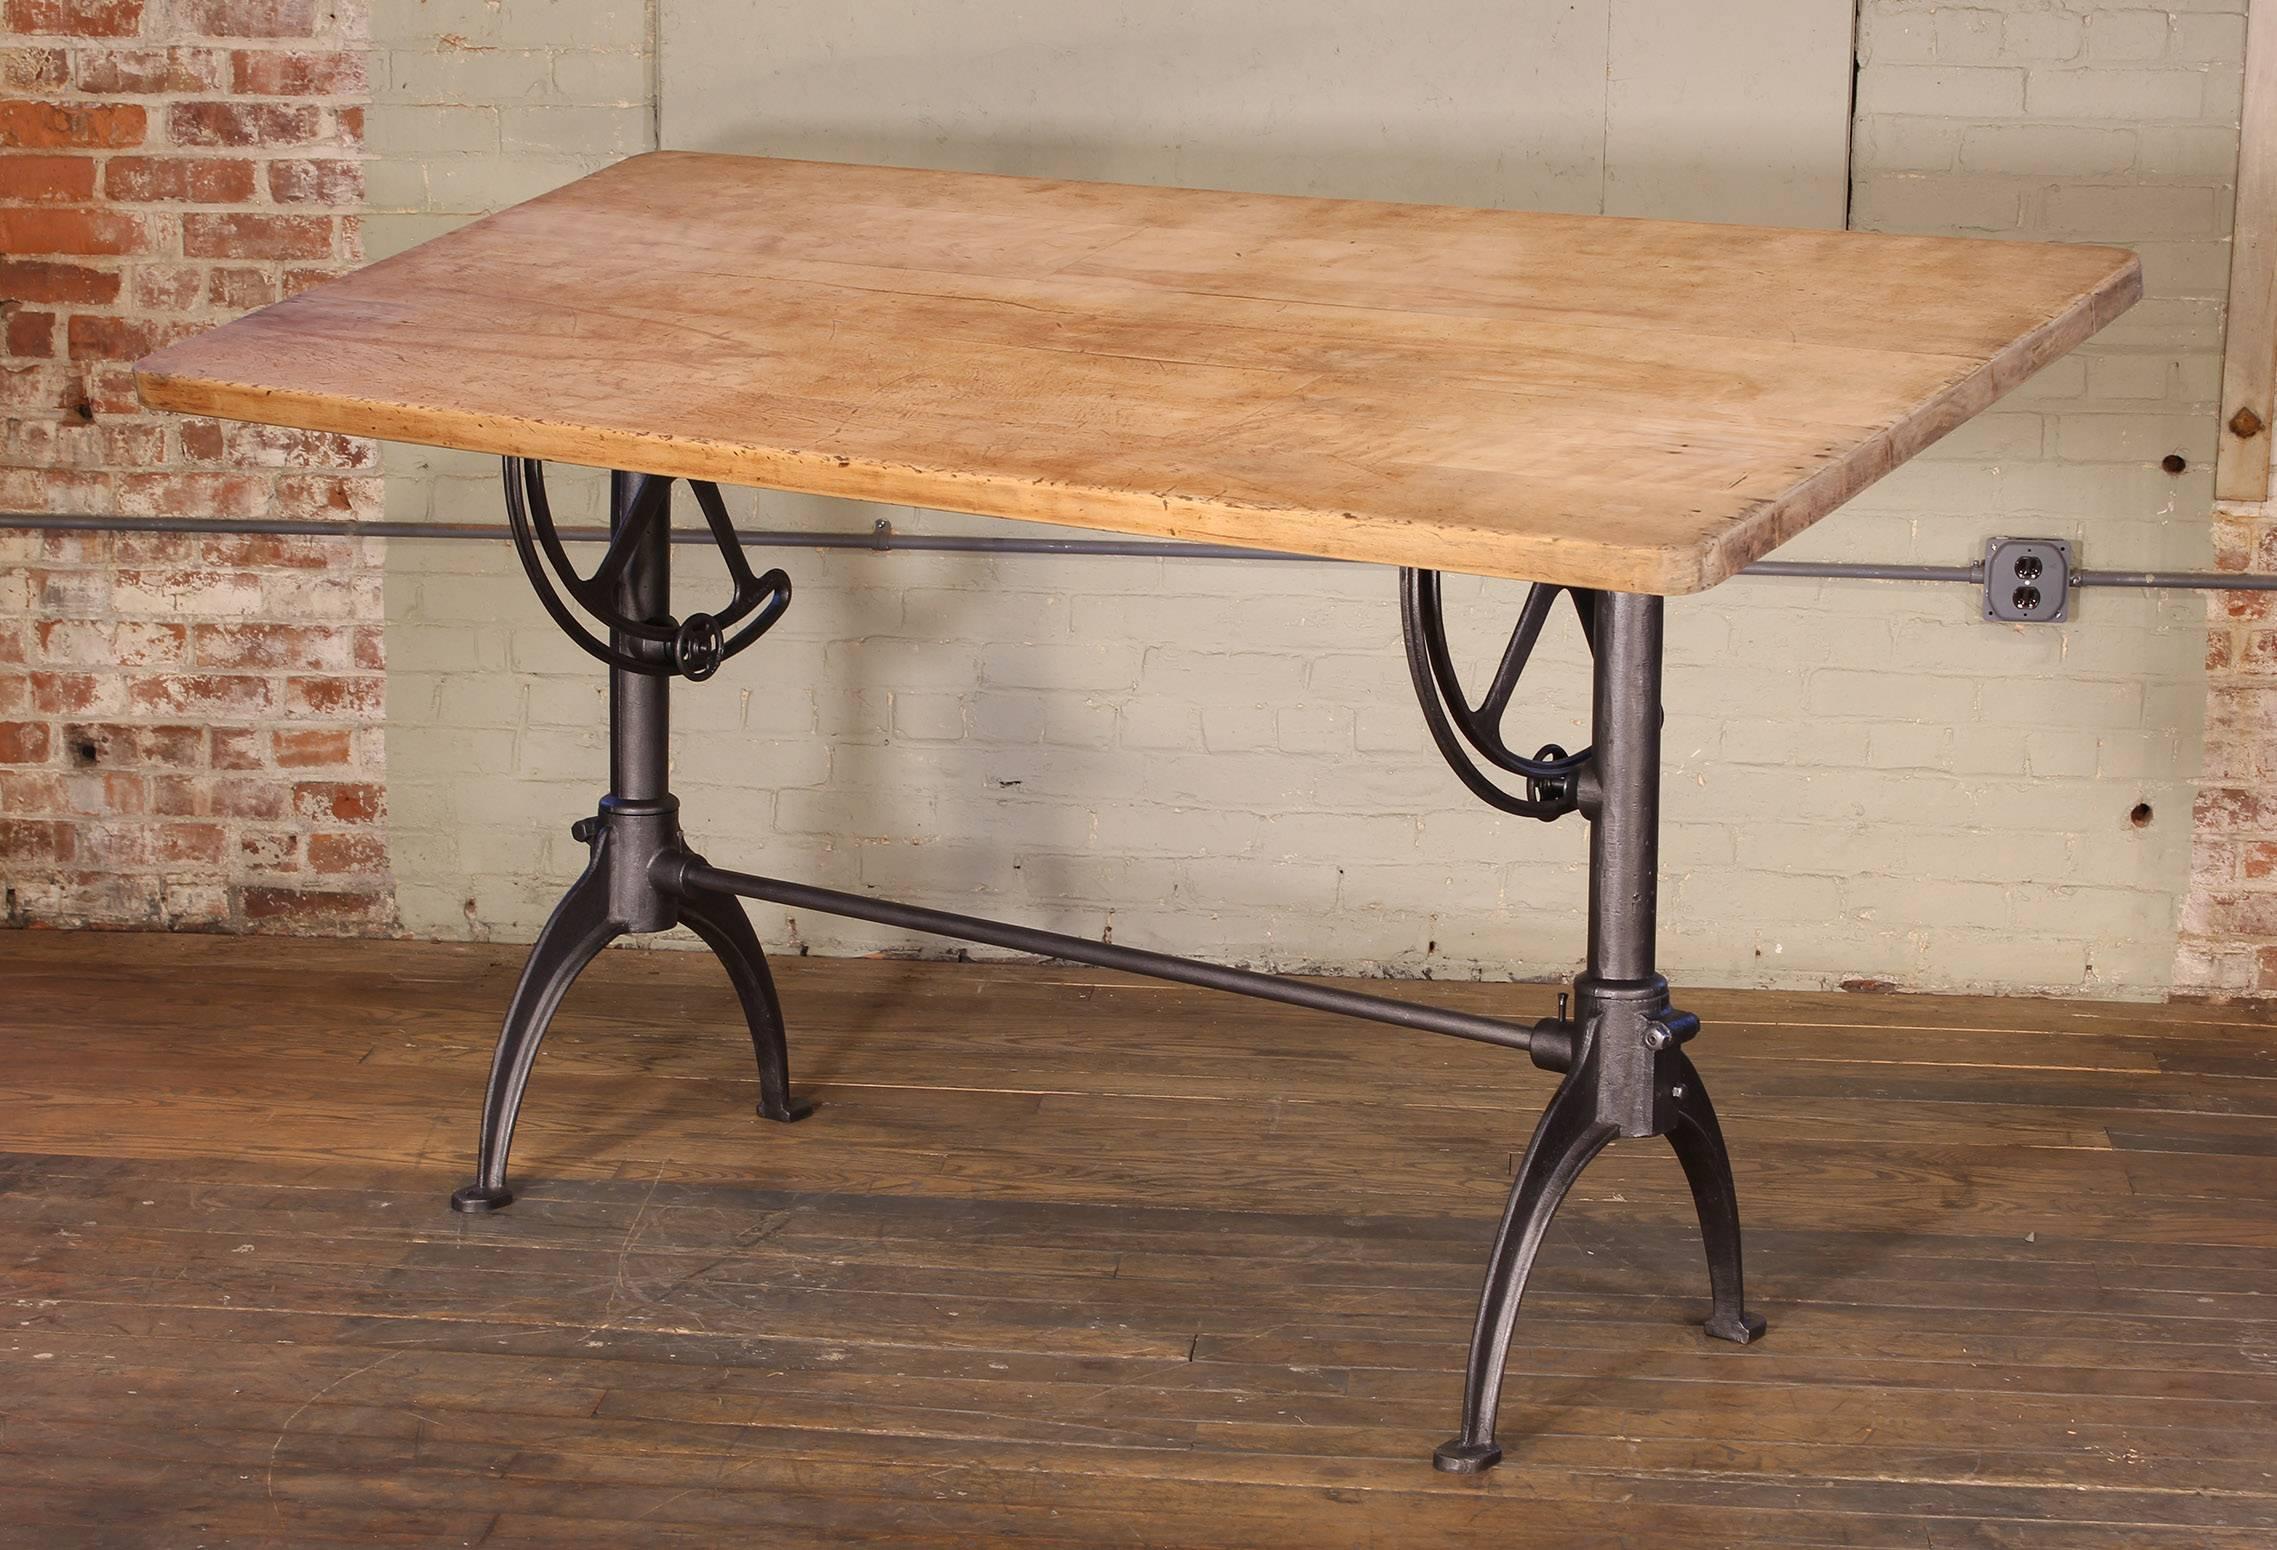 Vintage tall adjustable drafting table, cast iron and maple. Top can be tilted to lay flat to fully vertical.